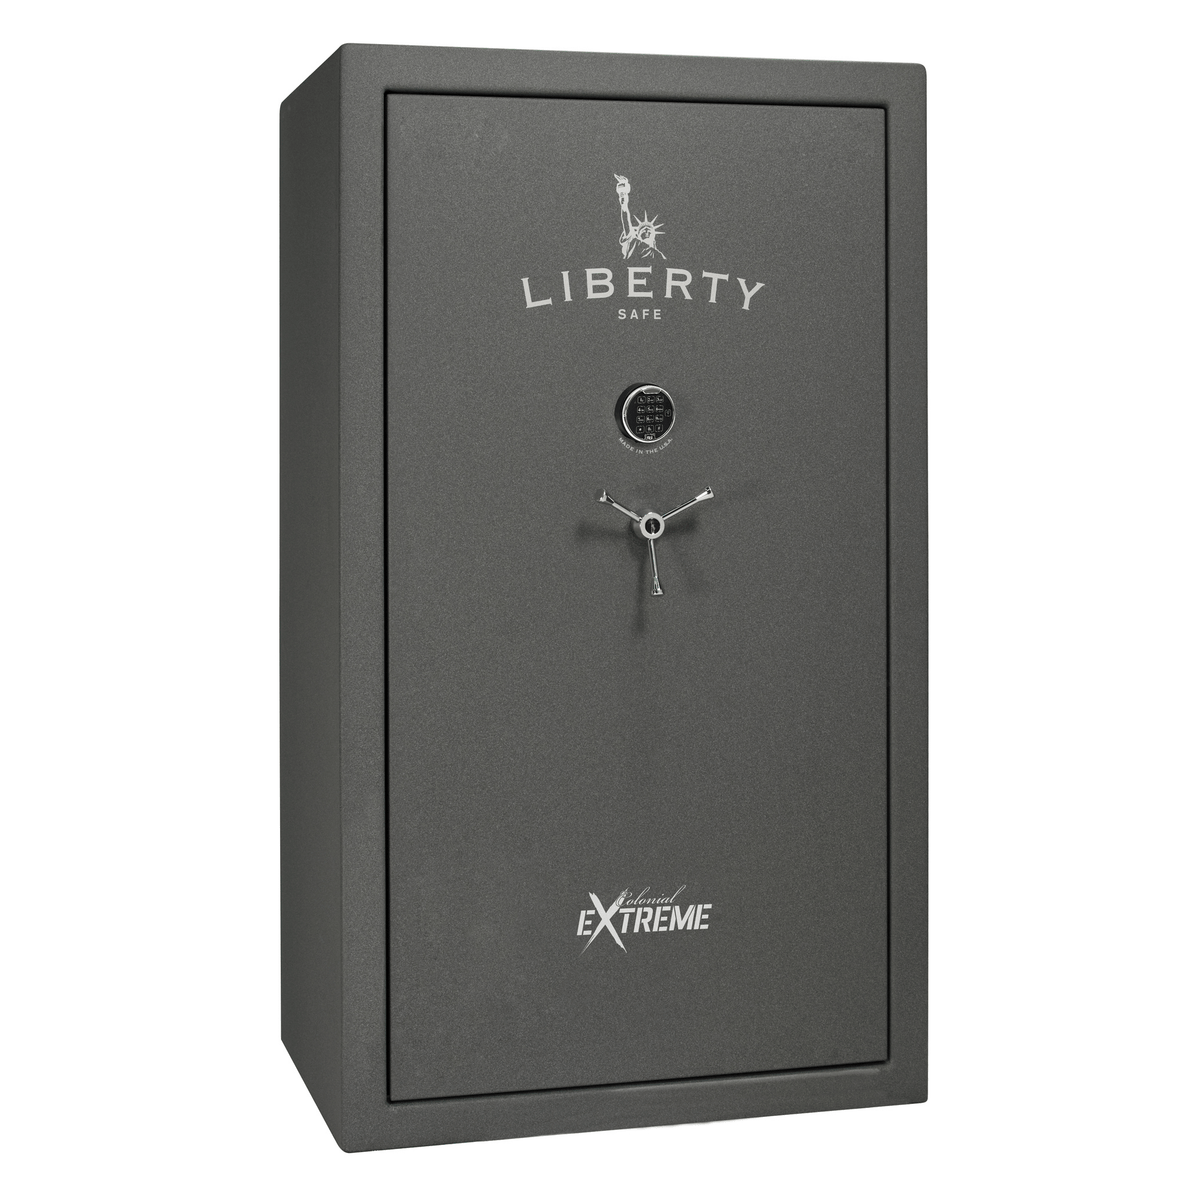 Liberty Colonial 50 Extreme Safe in Textured Granite with Chrome Electronic Lock.